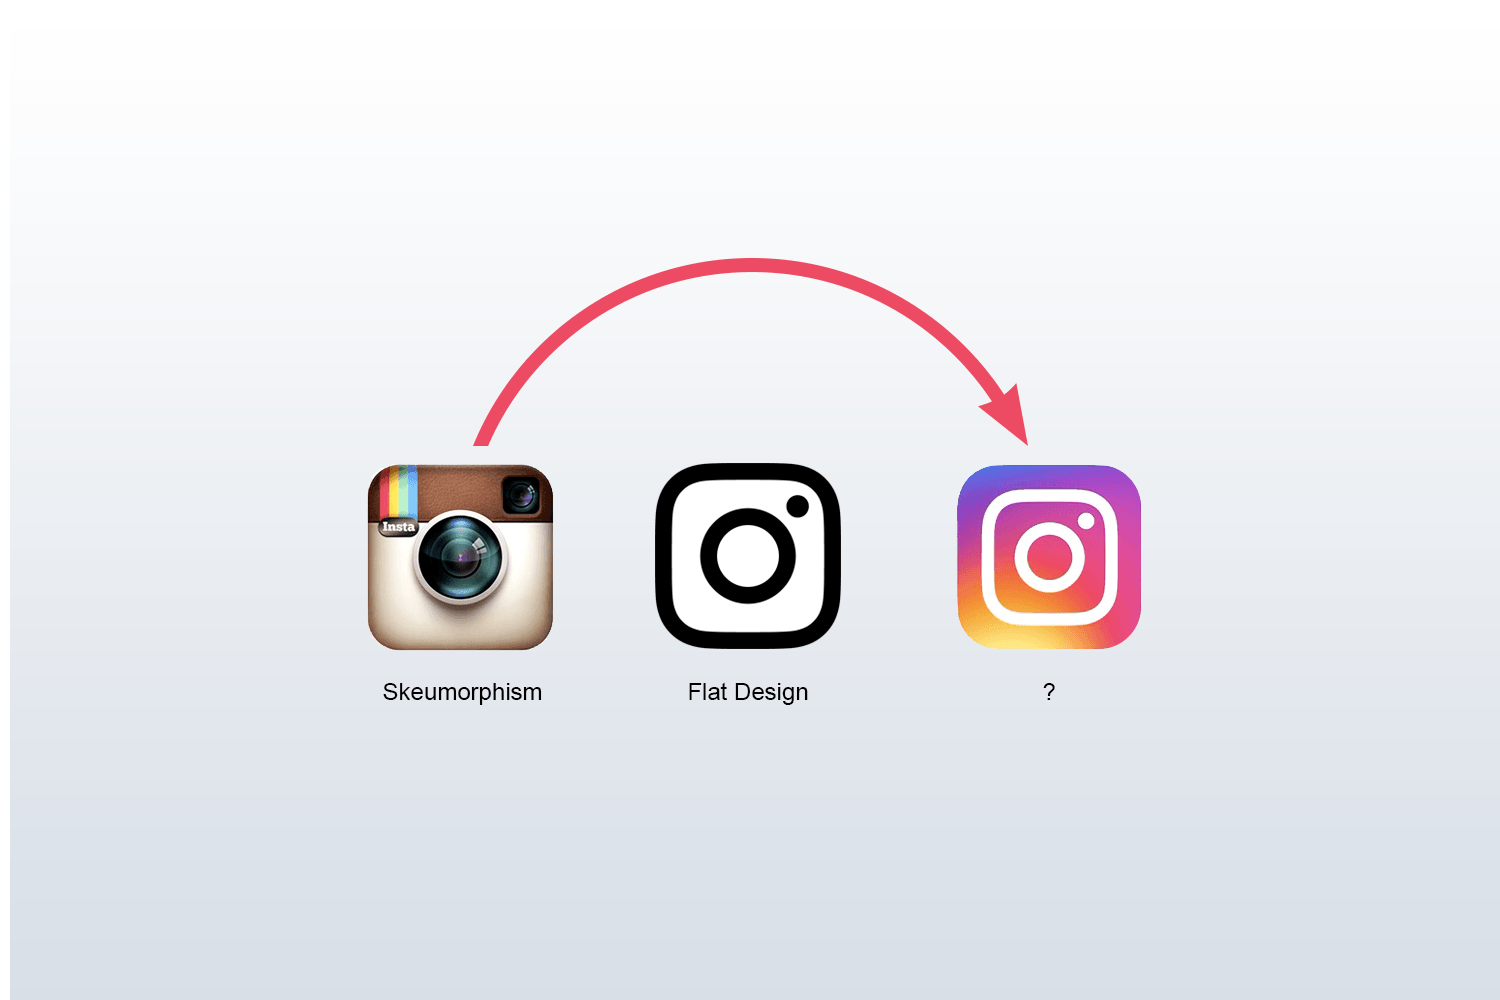 Flat Logo - The New Logo from Instagram Marks the Beginning of the End of Flat